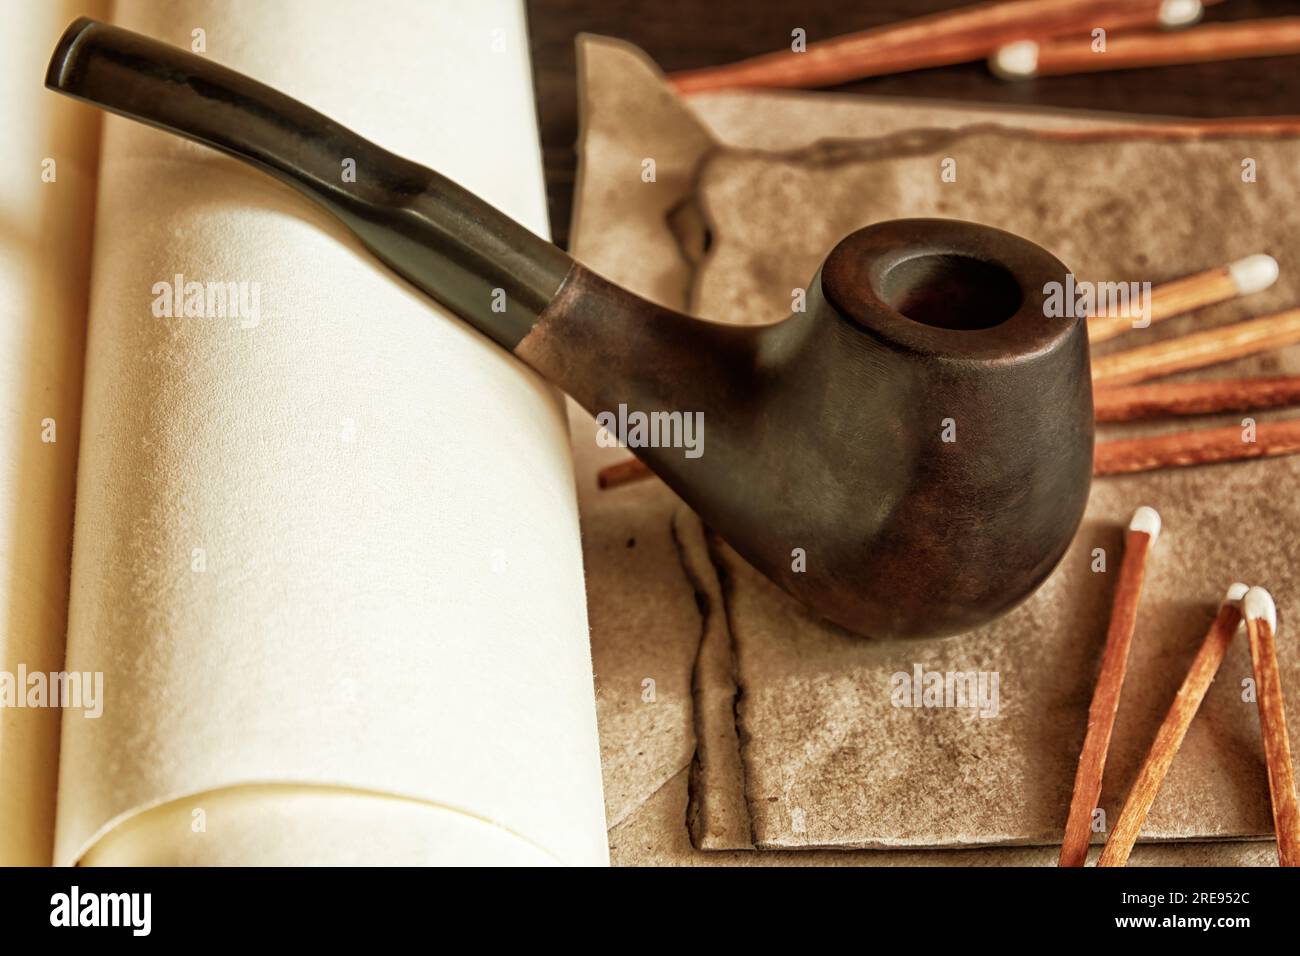 Smoking pipe with tobacco and matches on the pergament tube. Vintage gentleman's equipment Stock Photo